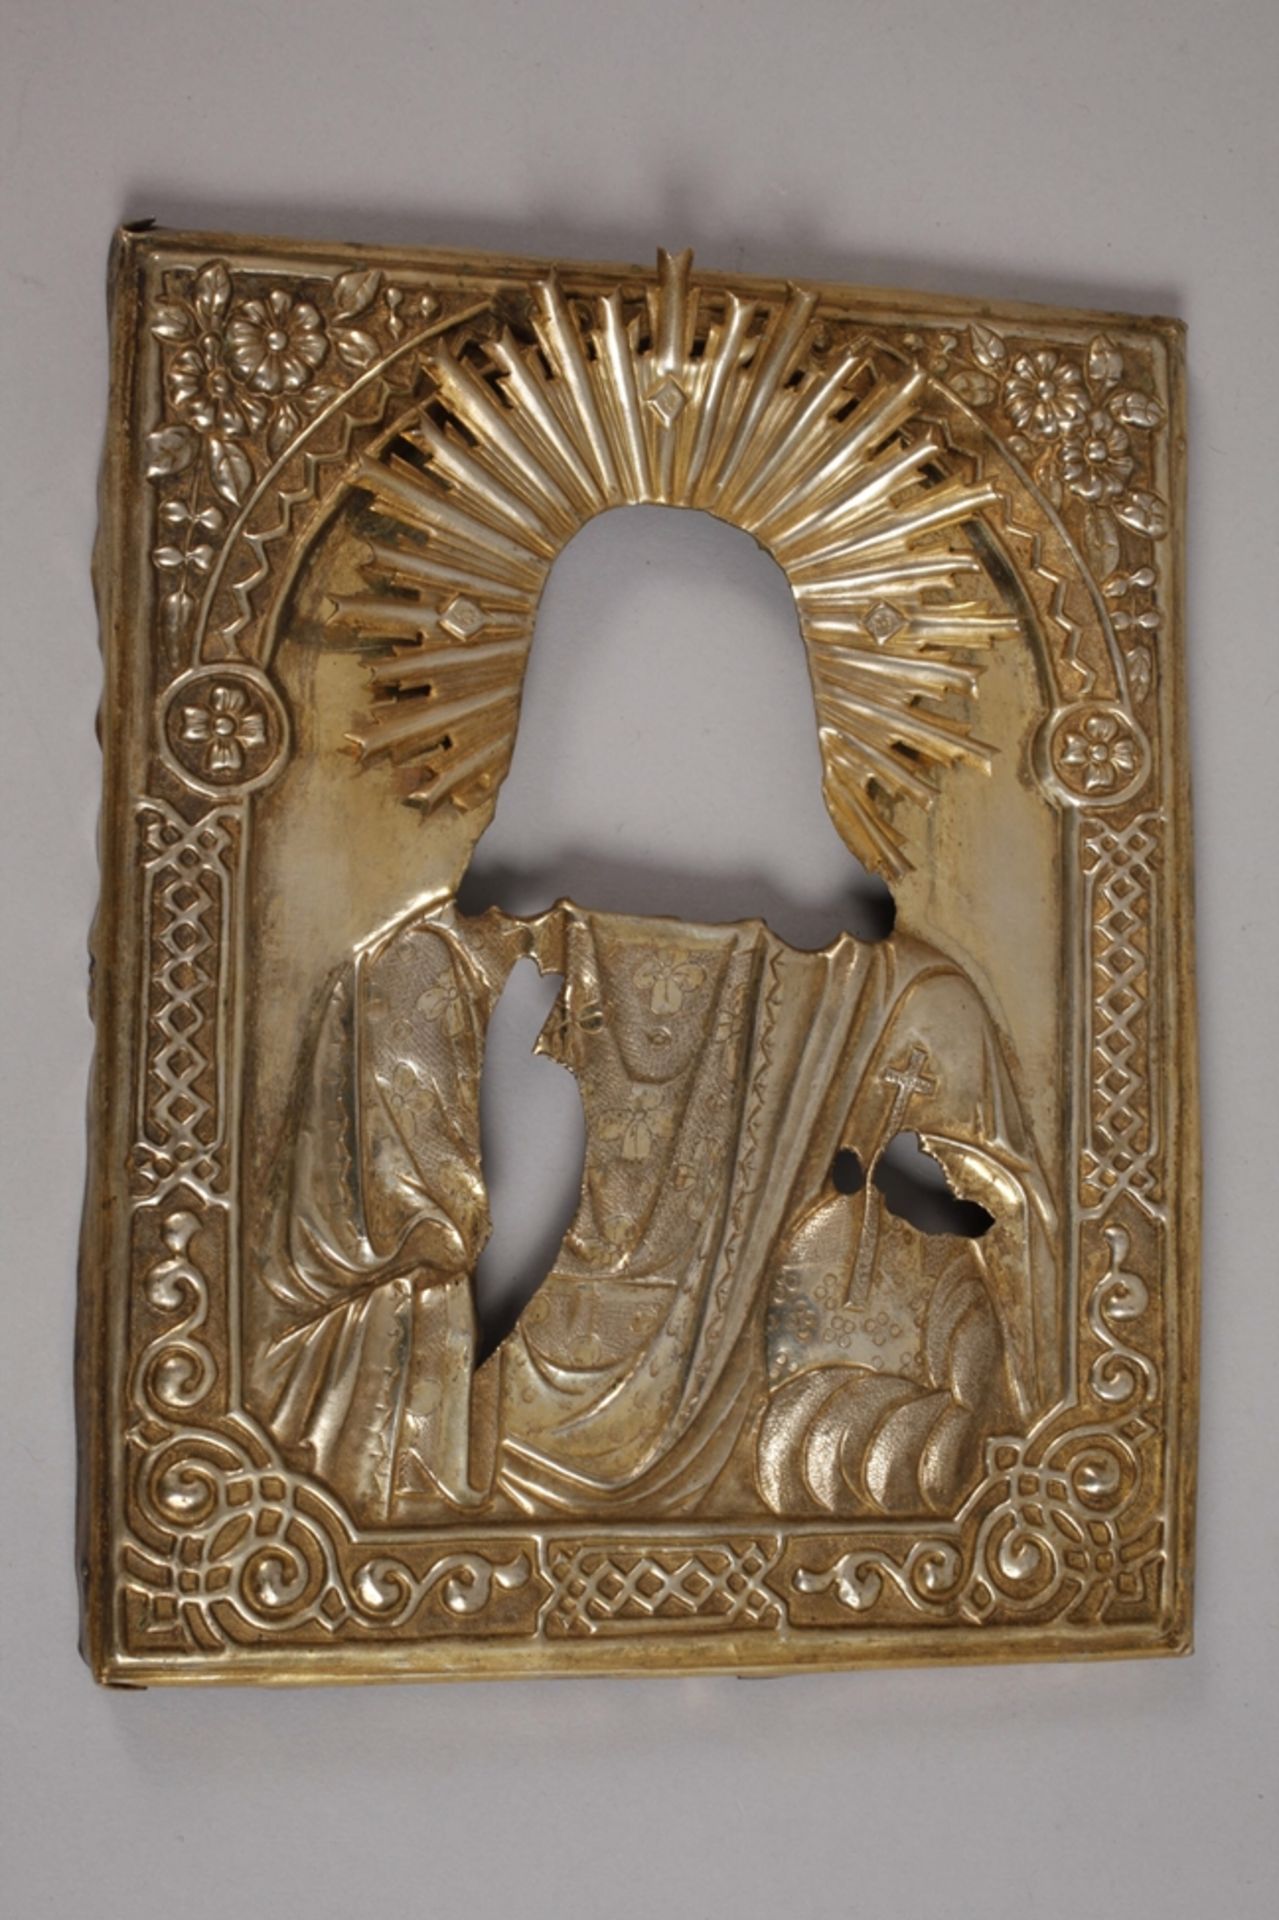 Icon in a diorama - Image 5 of 8